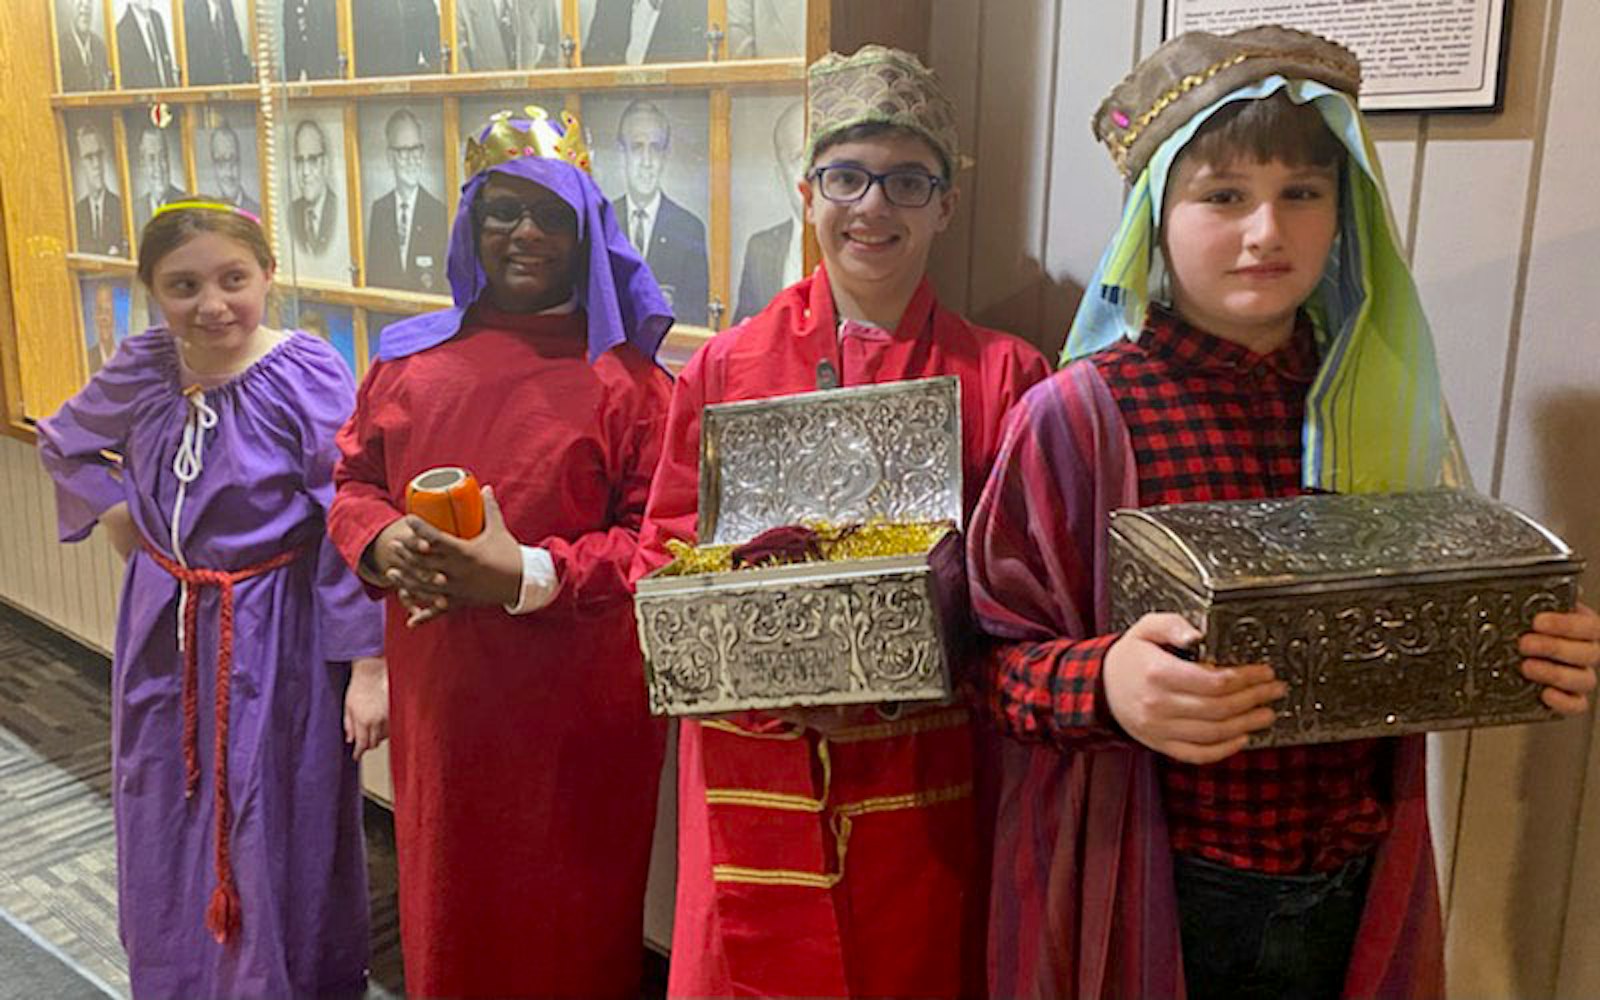 Children dress as the three kings during St. John Paul II Classical Catholic School's Epiphany party at the Knights of Columbus Hall in Wyandotte in January 2023. The children carried the traditional gifts of gold, frankincense and myrrh. (Courtesy photo)